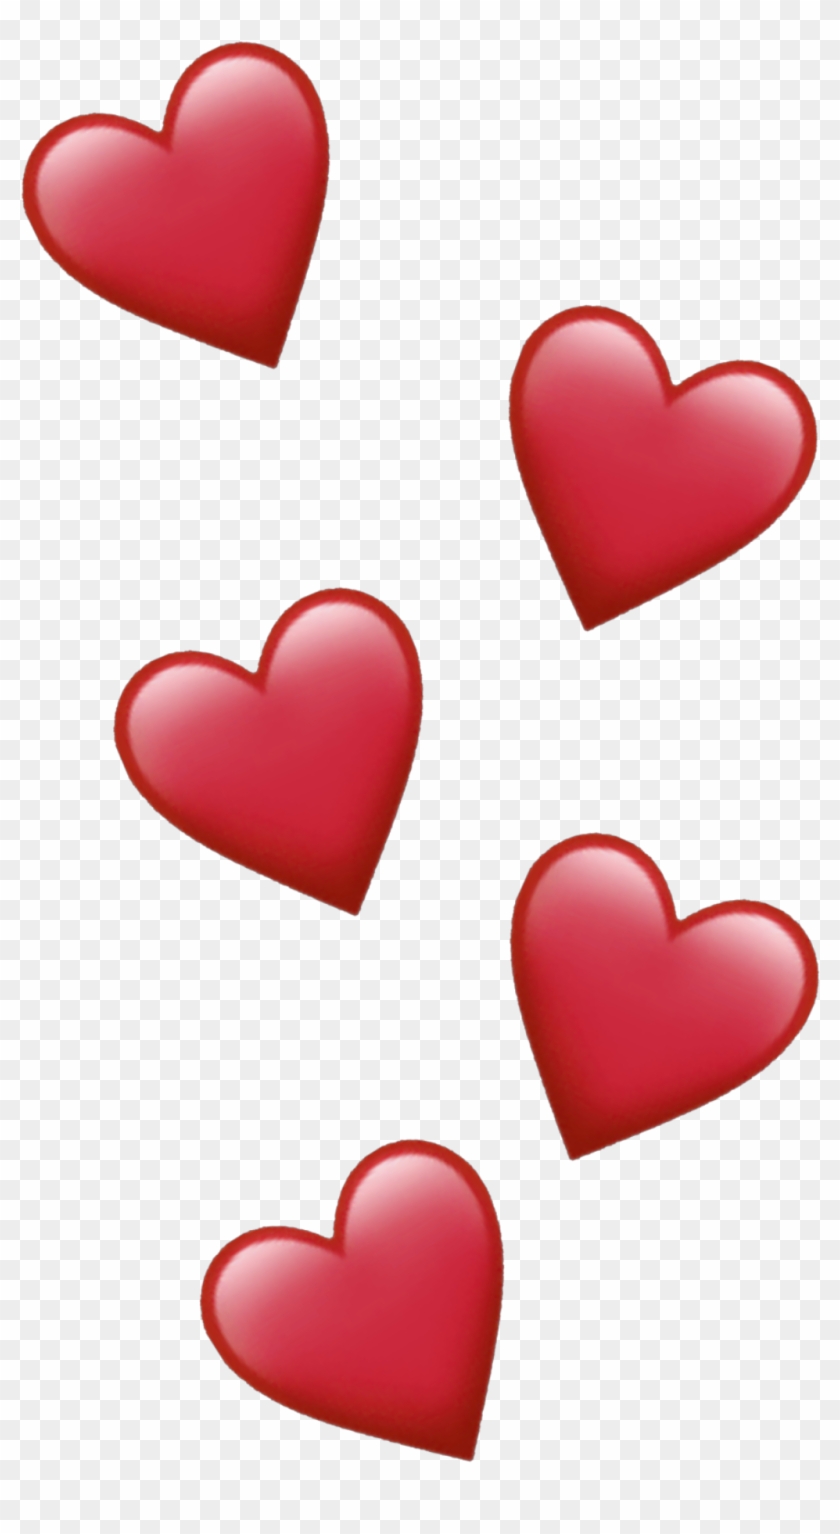 Red Heart Emoji Heart Hd Png Download 2896x2896699734 Pngfind